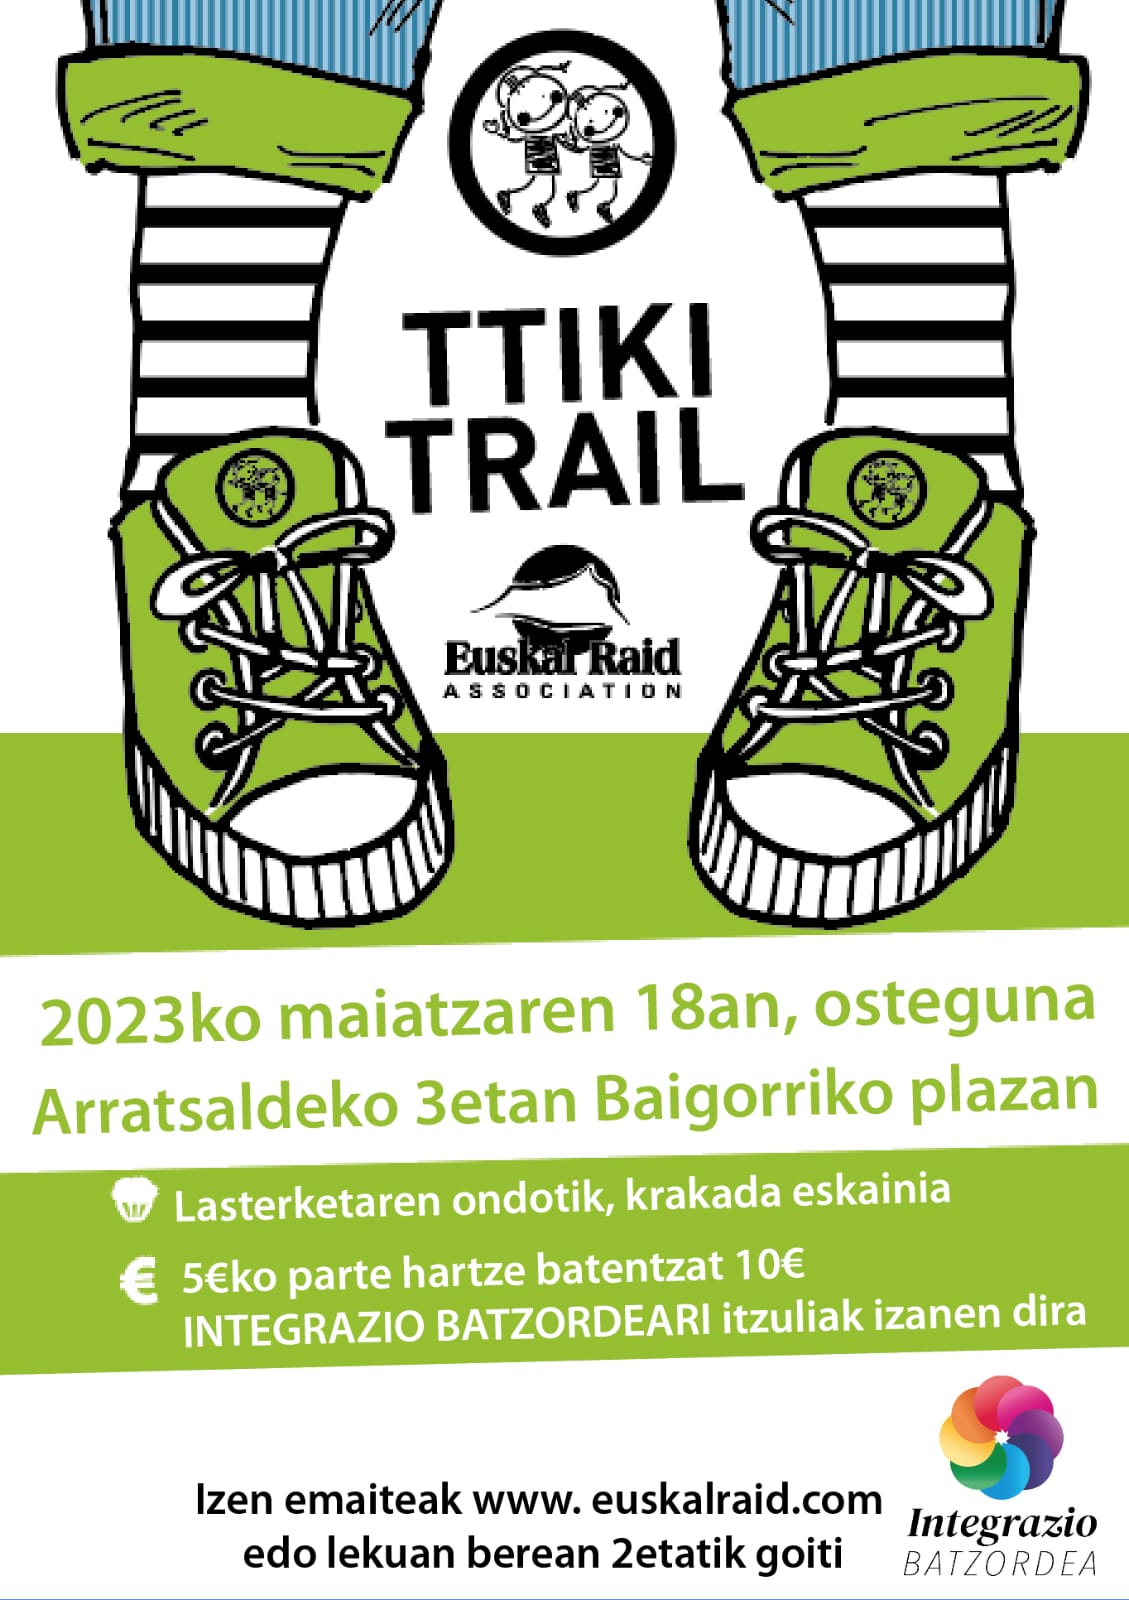 You are currently viewing Ttiki trail à Baigorry